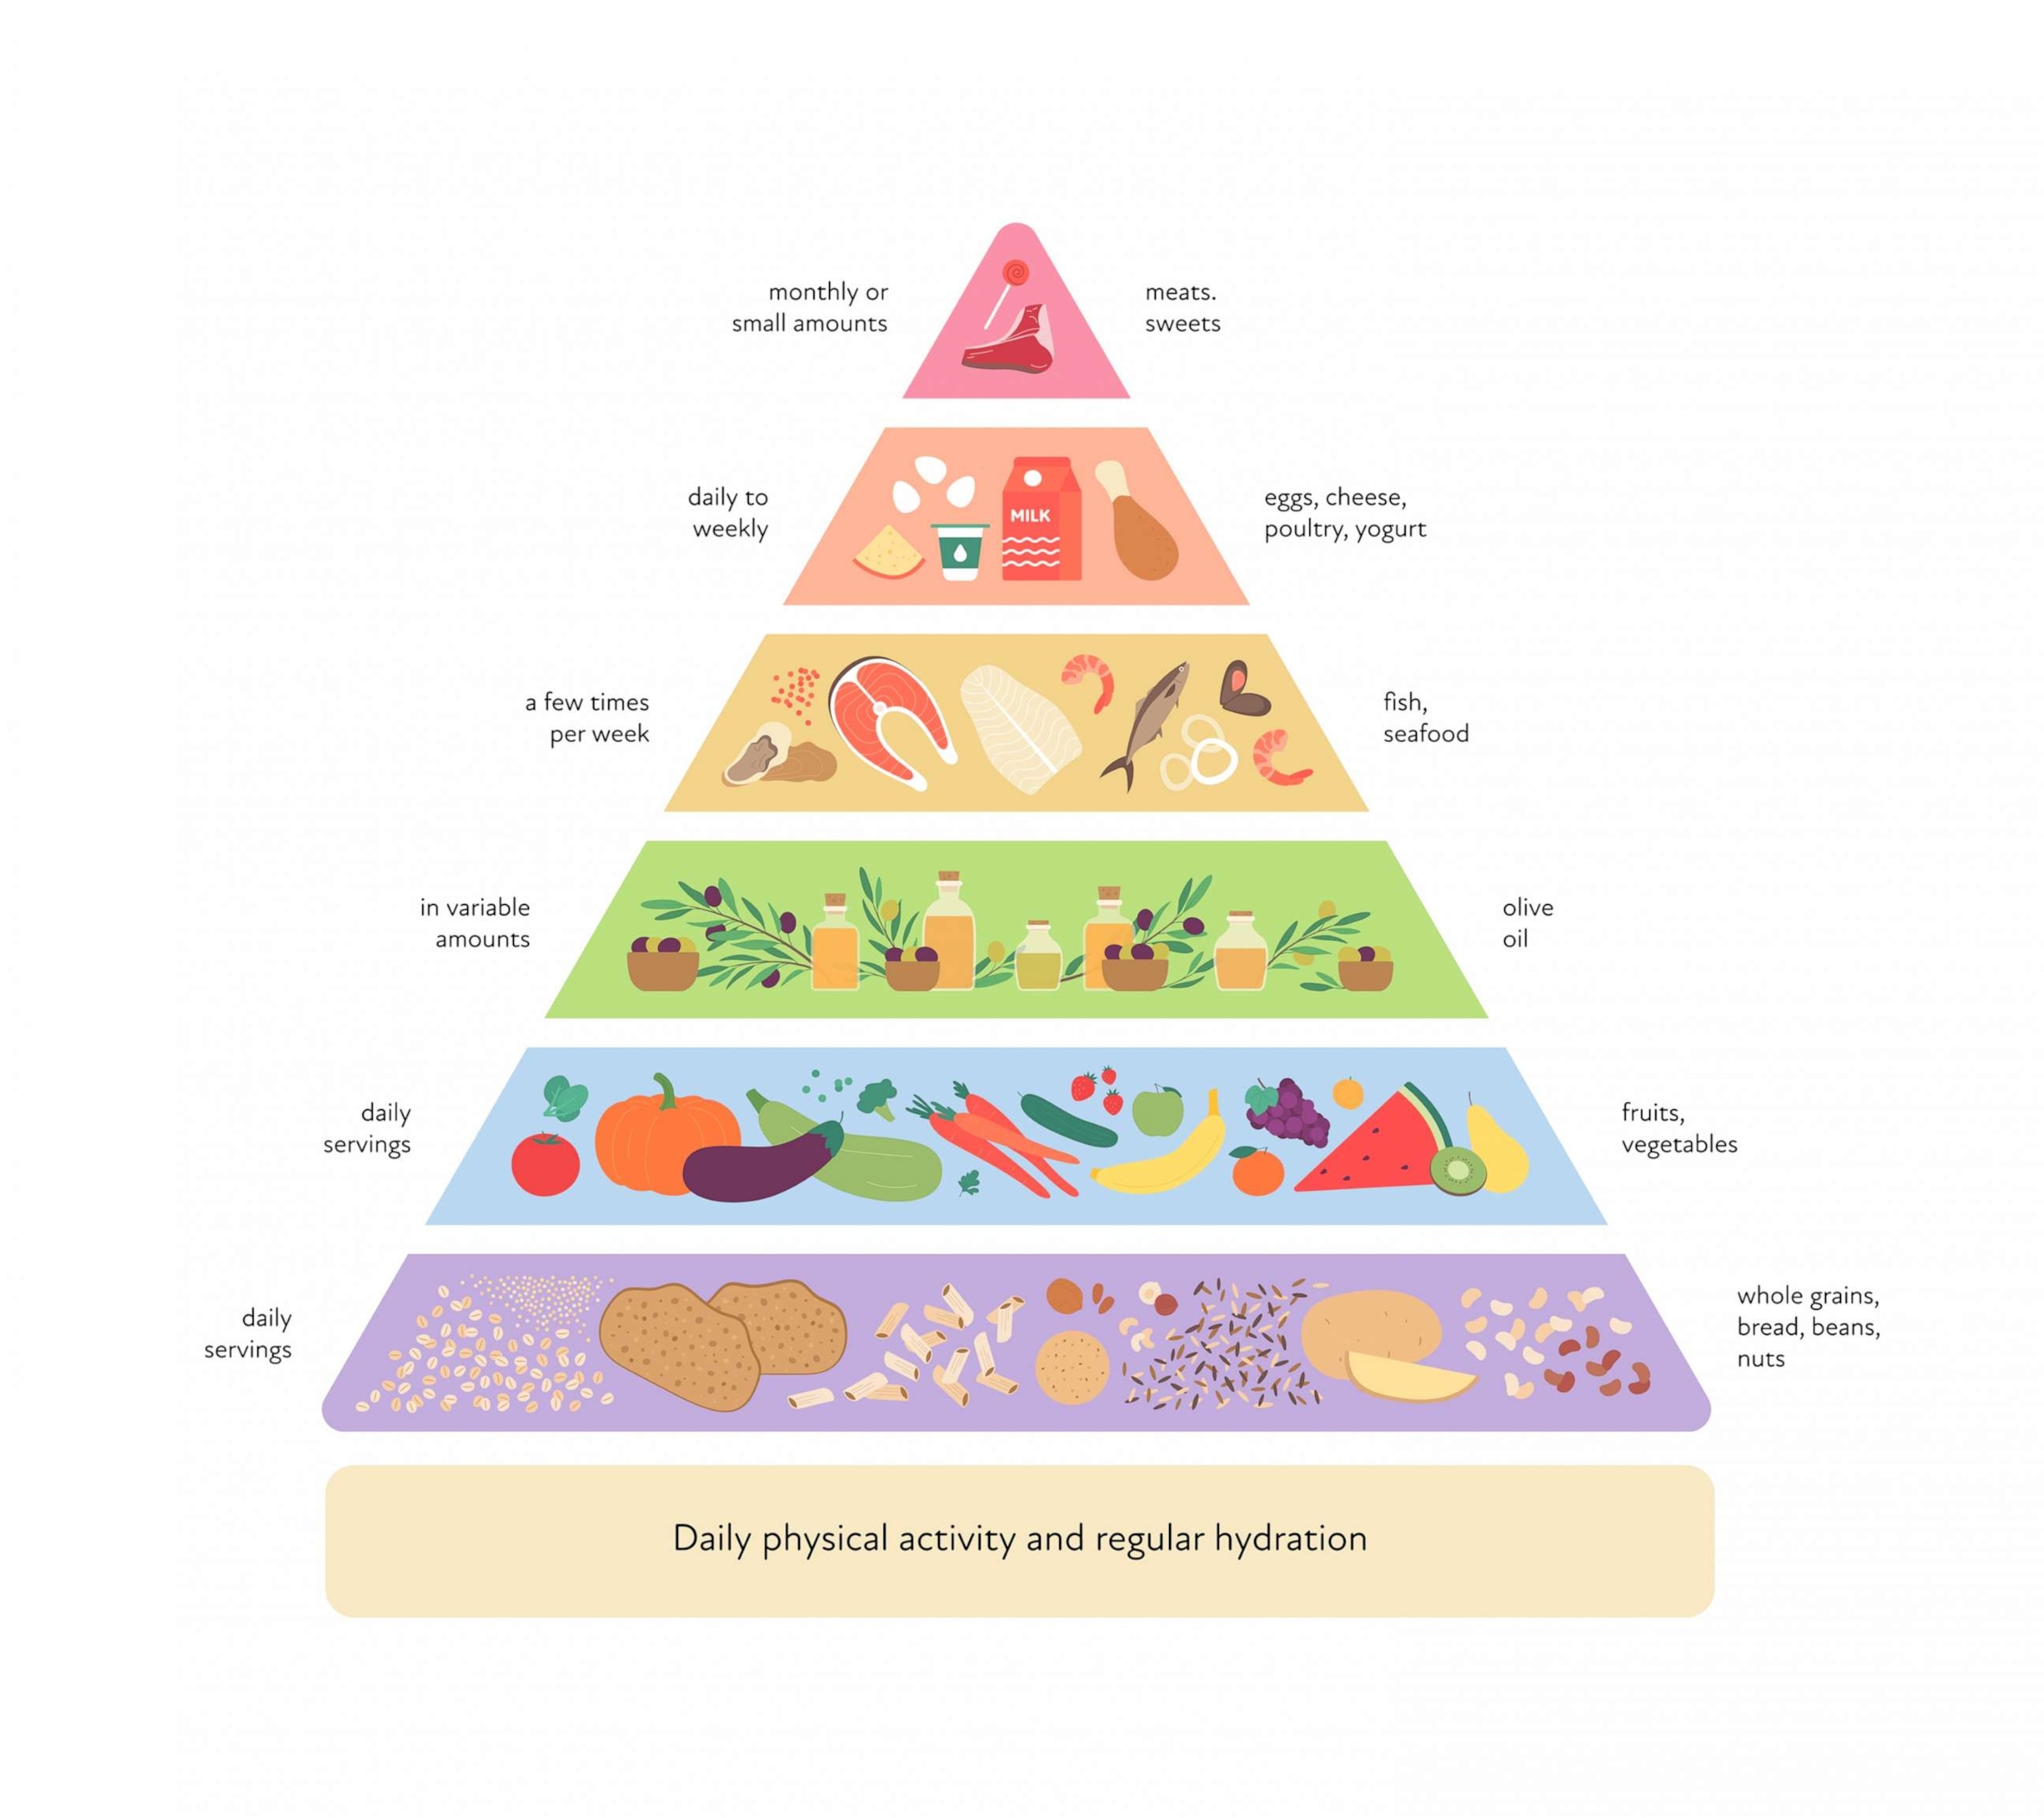 PHOTO: An infographic depicting the Mediterranean diet food pyramid